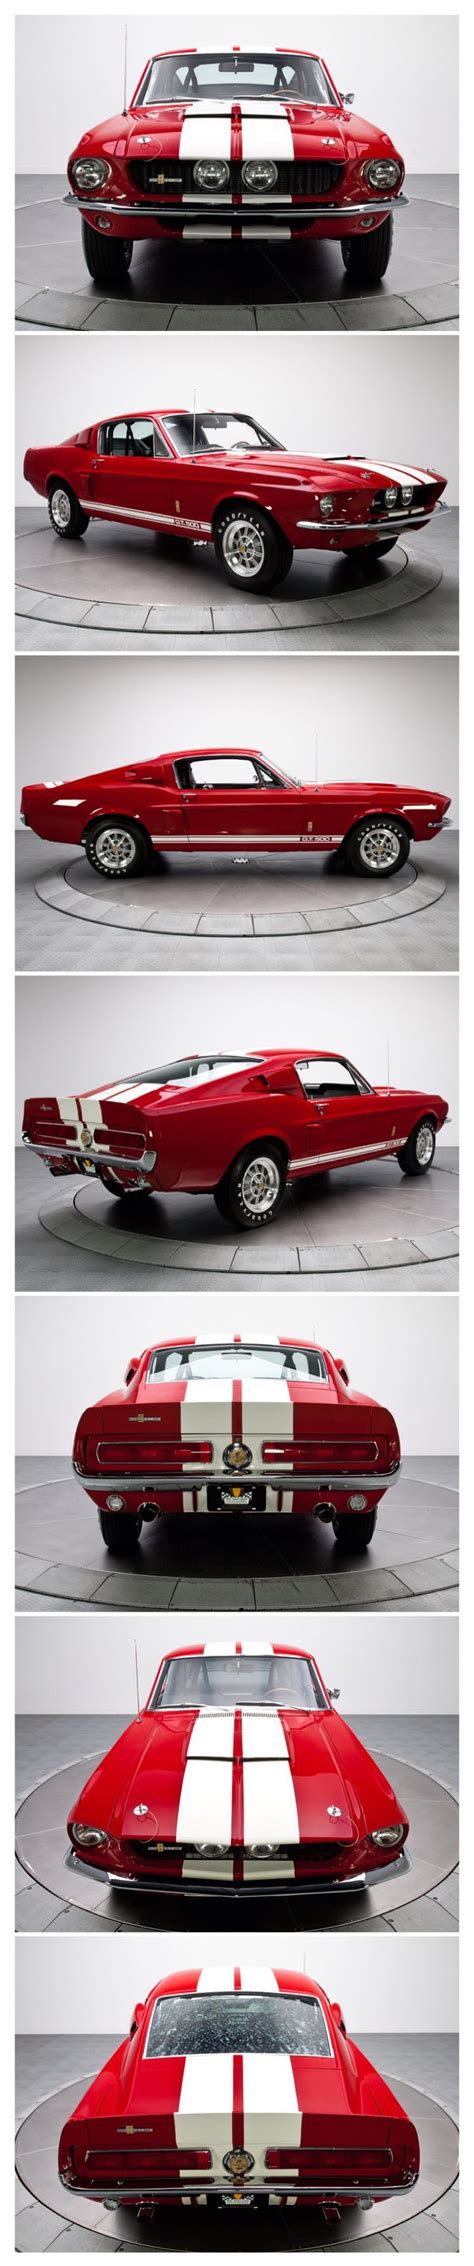 1967 shelby gt500kr classiccars ctins shelby classic cars shelby mustang shelby